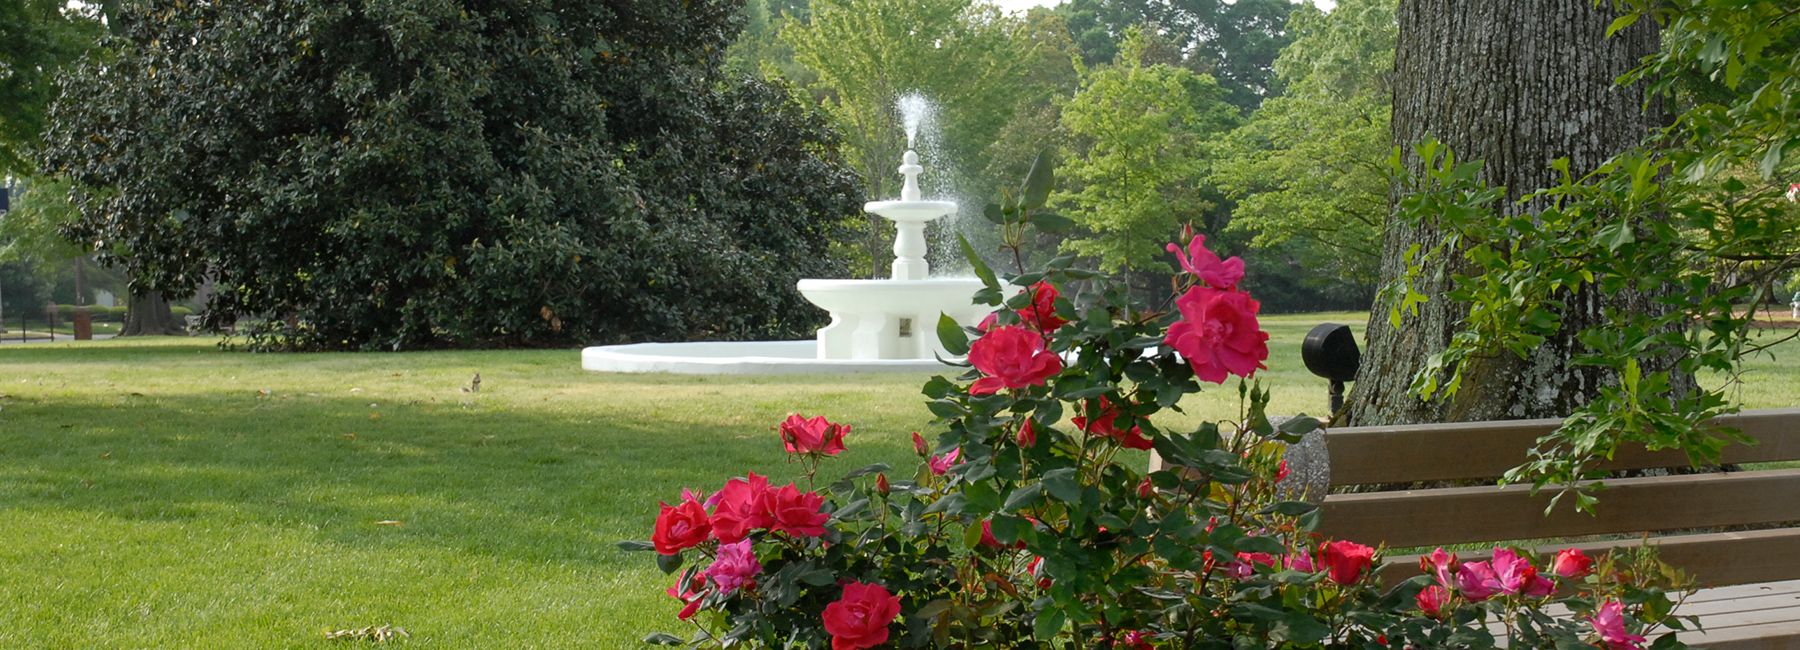 Fountain and Flowers